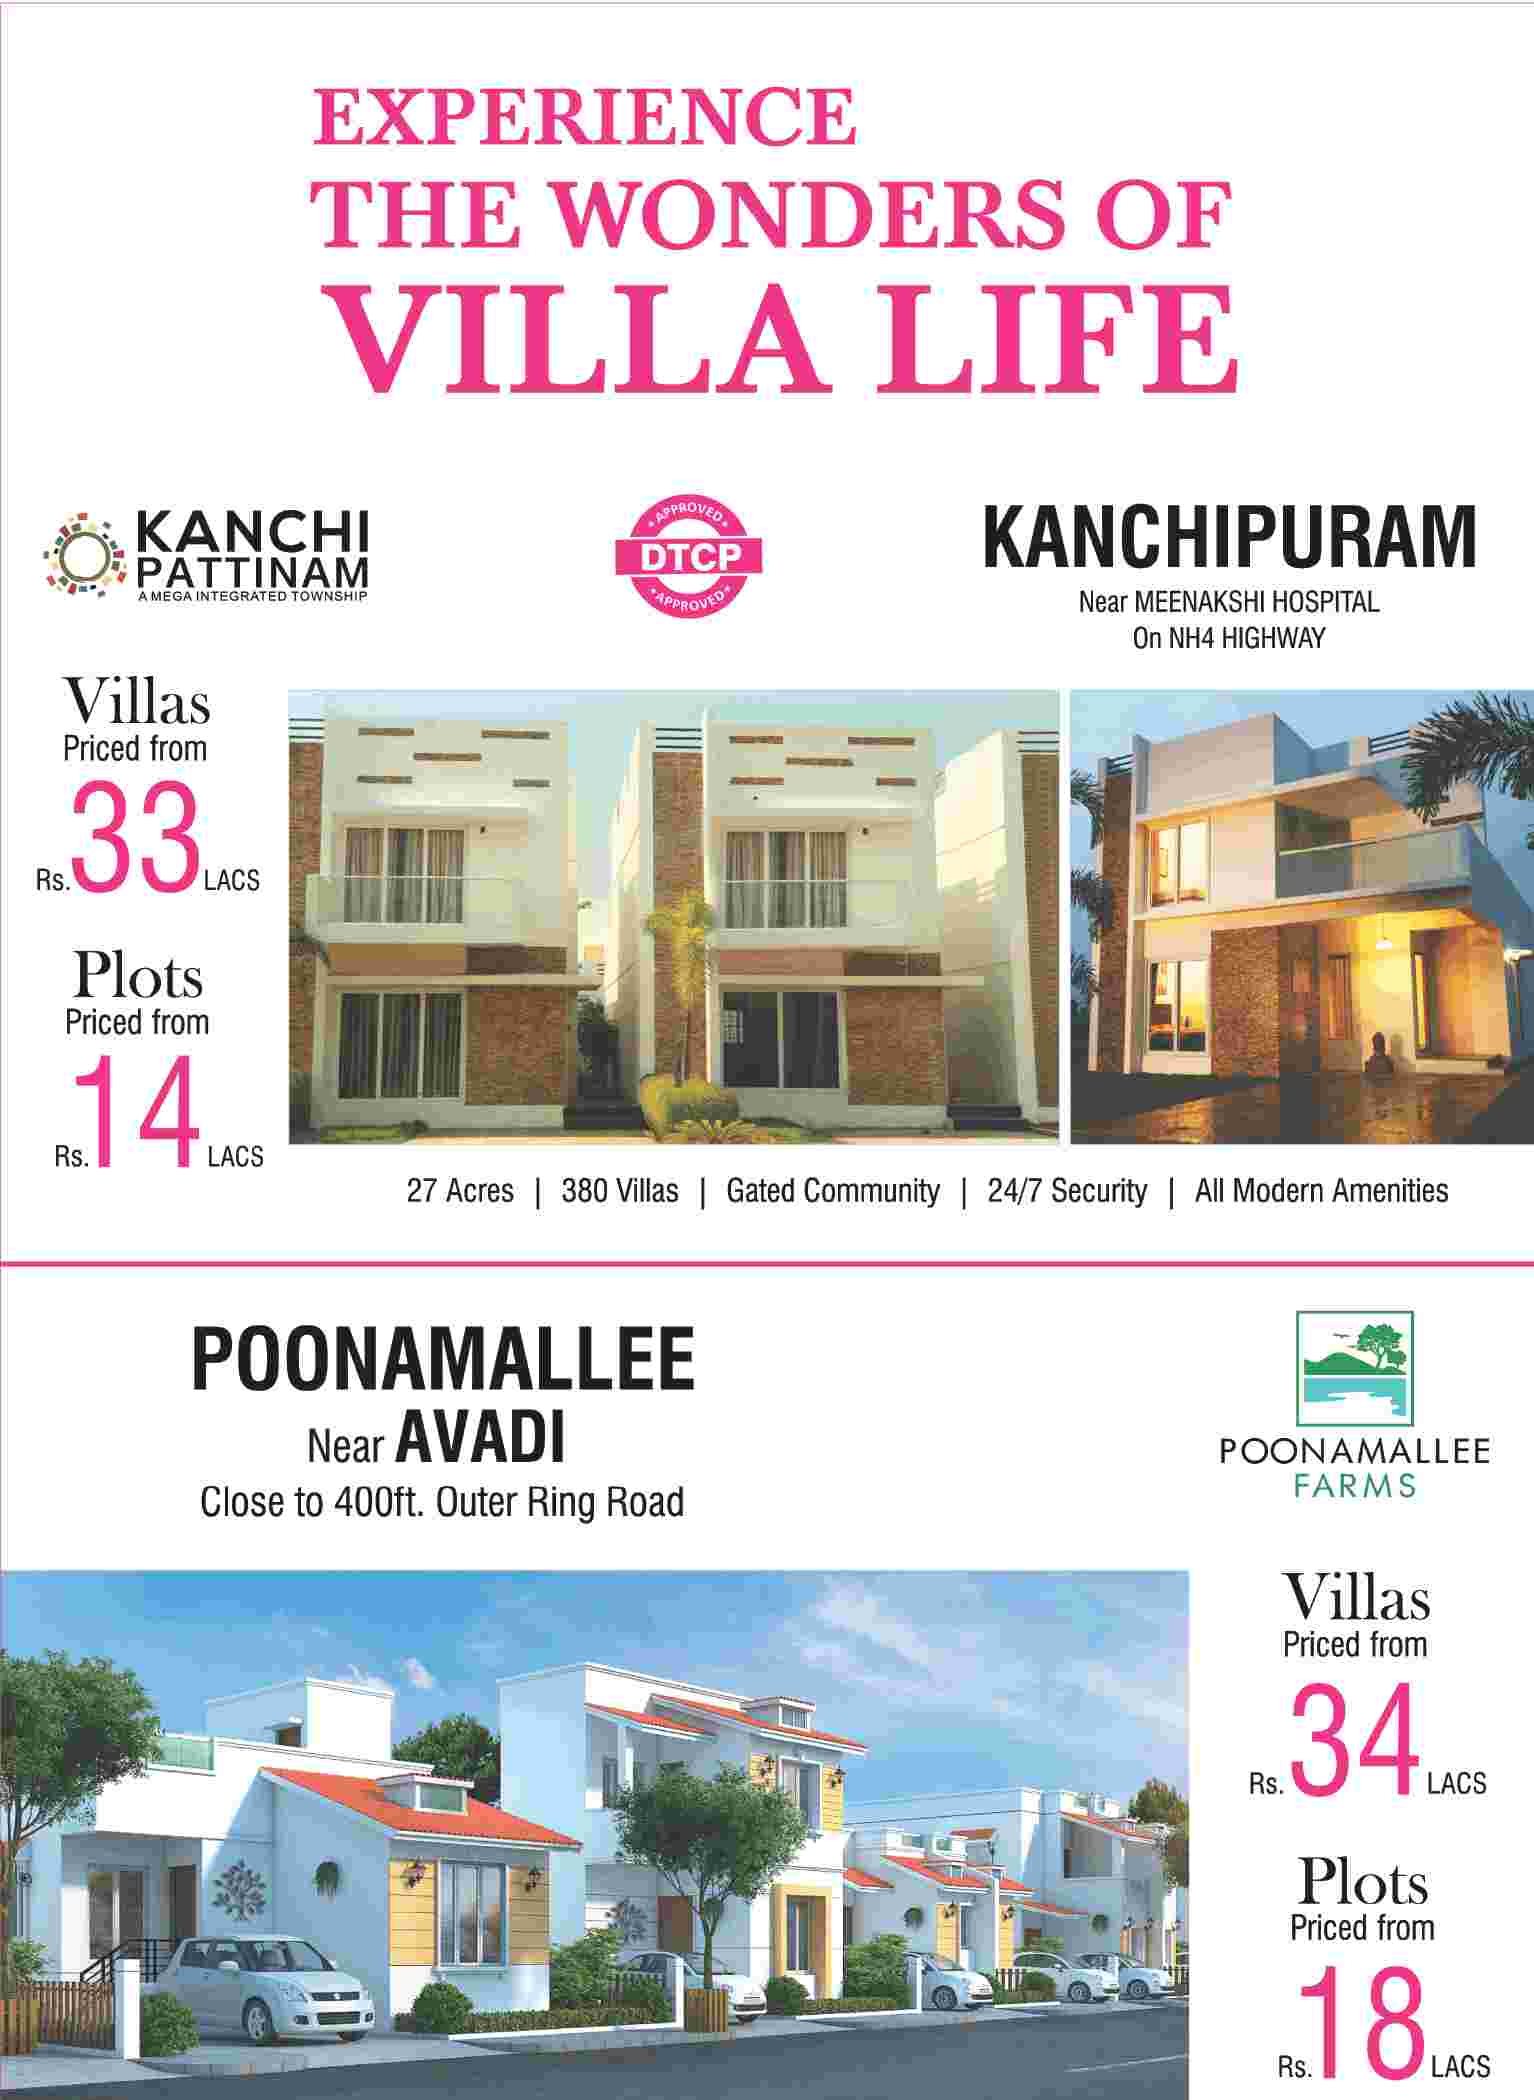 Experience the wonders of villa life at Colorhomes properties in Chennai Update